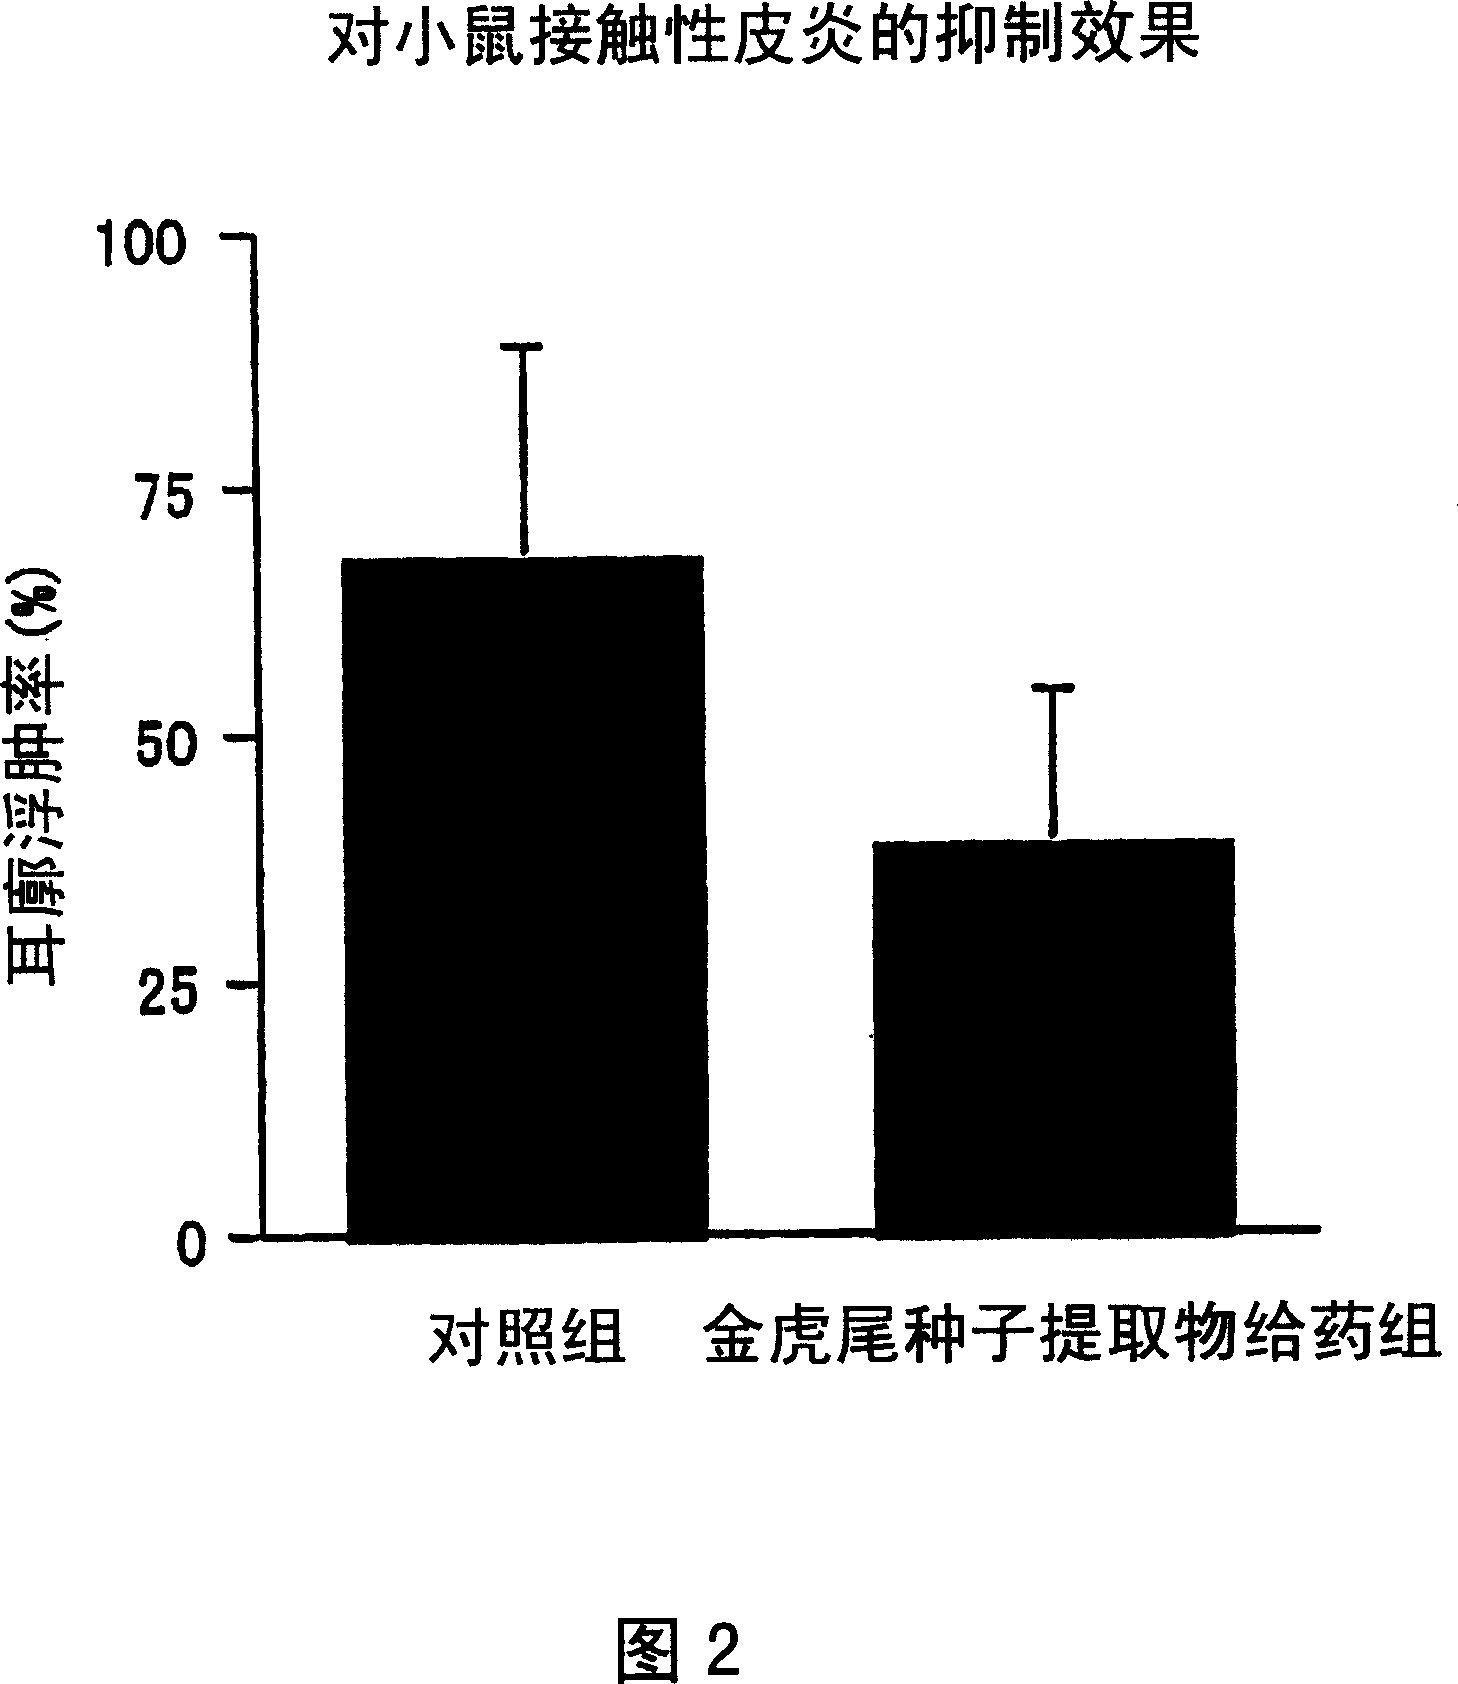 Nerve growth factor production inhibitor and external preparation for skin, cosmetic, quasi medicine, itch prophylactic and therapeutic agent and atopic dermatitis therapeutic agent mixed with the ner